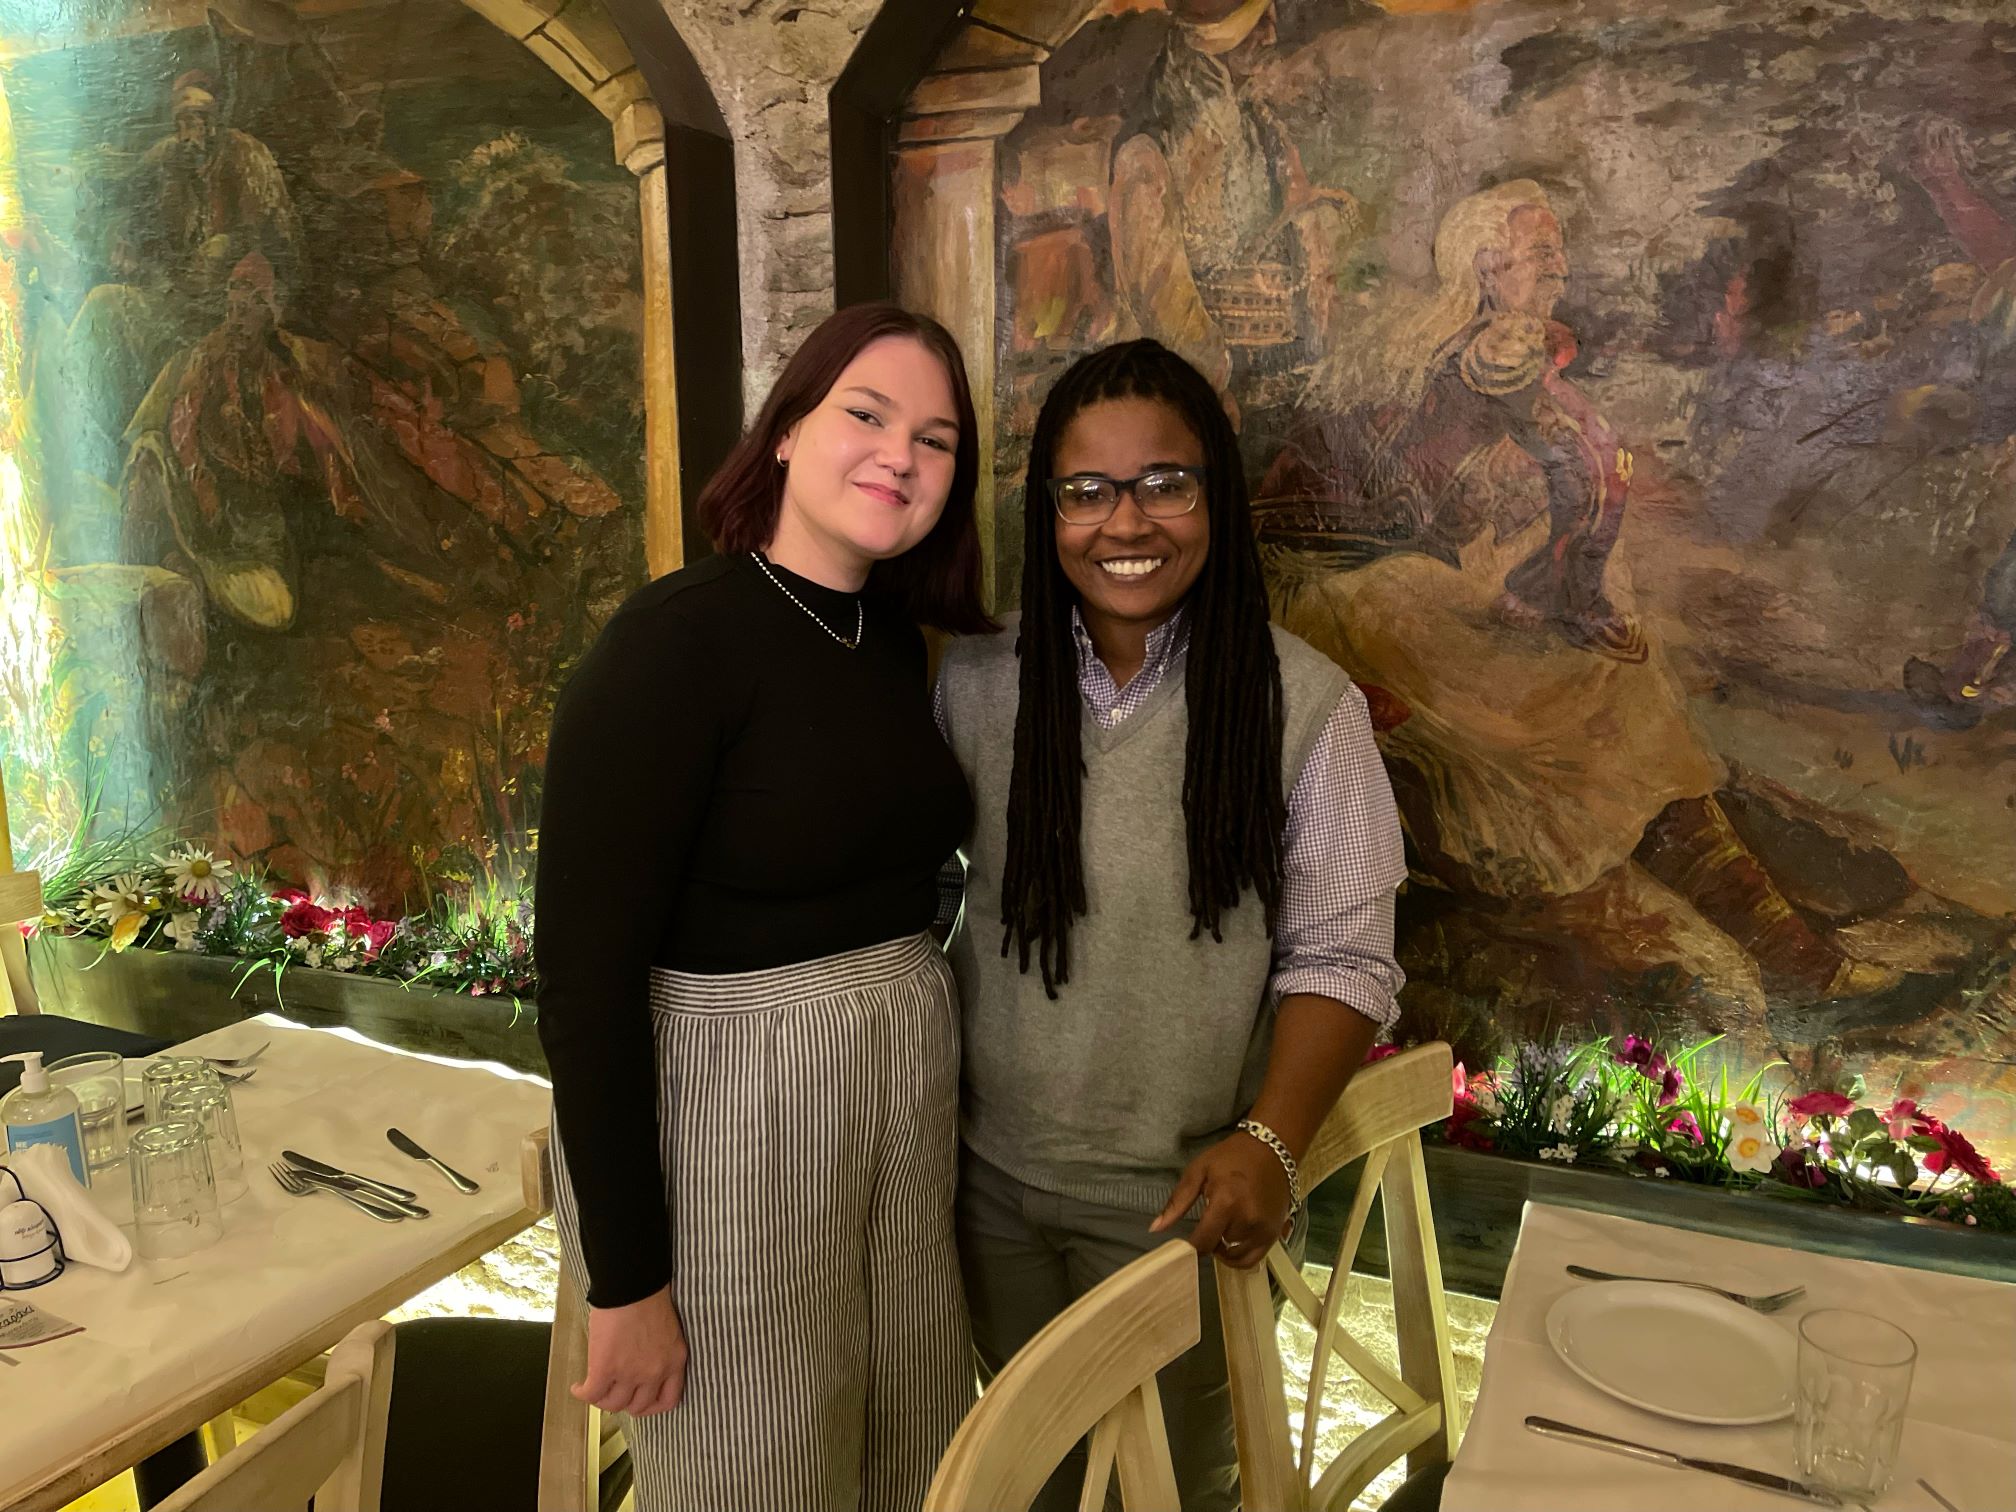 Eva Leaverton and Megan Coates attend the first Pharos Summit in Athens, Greece to discuss expanding study abroad opportunities.